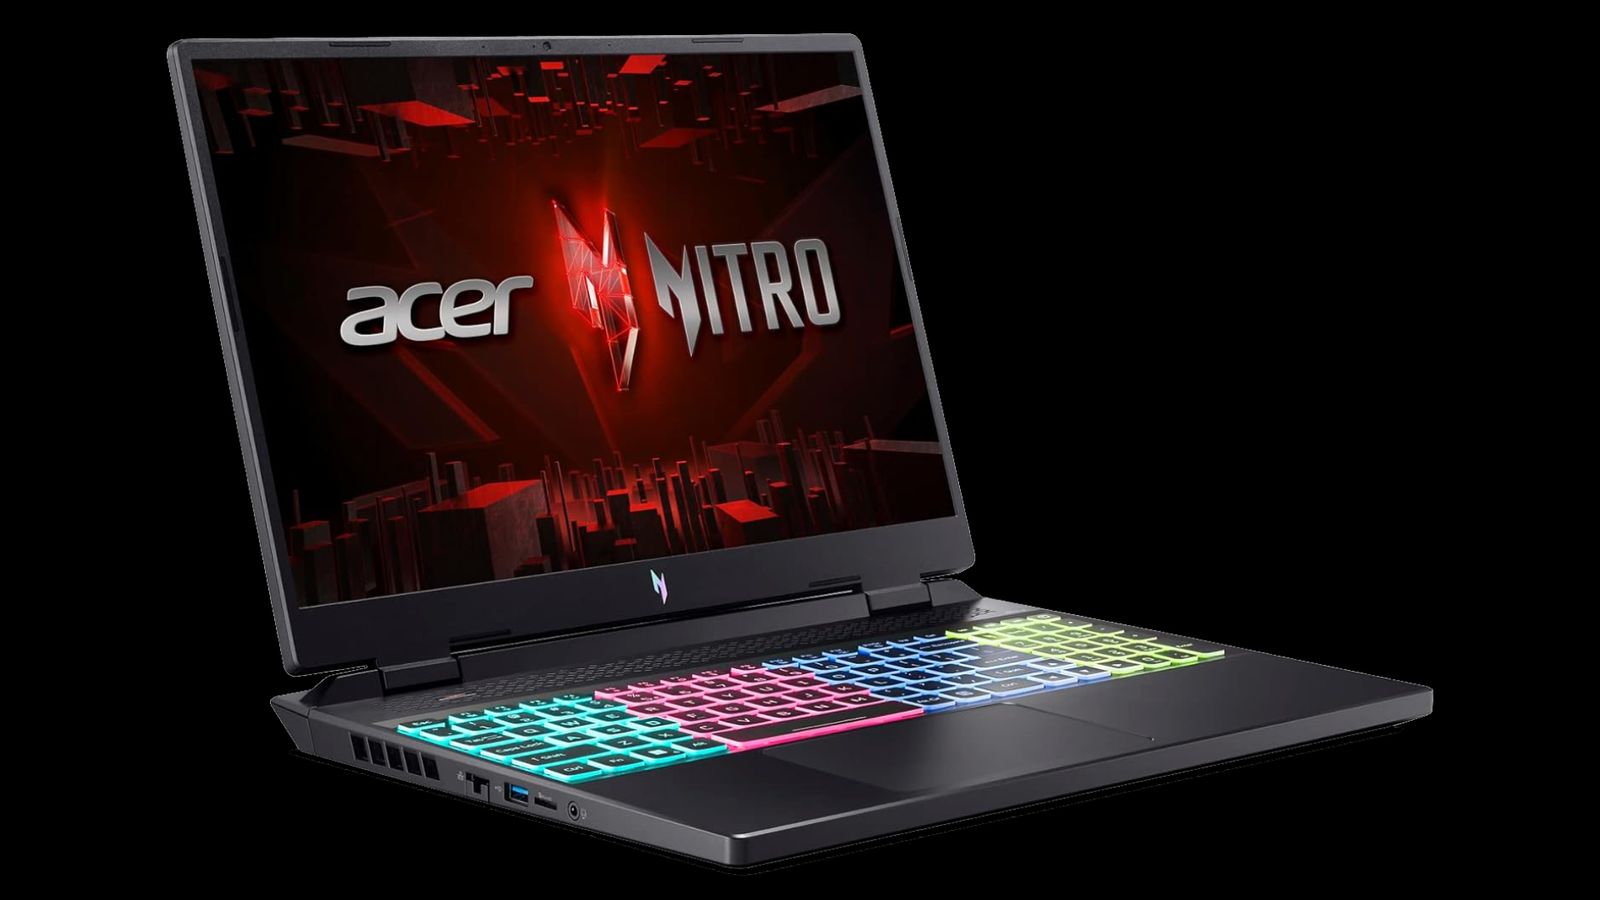 Acer Nitro 16 product image of a black laptop with multicoloured backlit keys and red Acer branding on the screen.